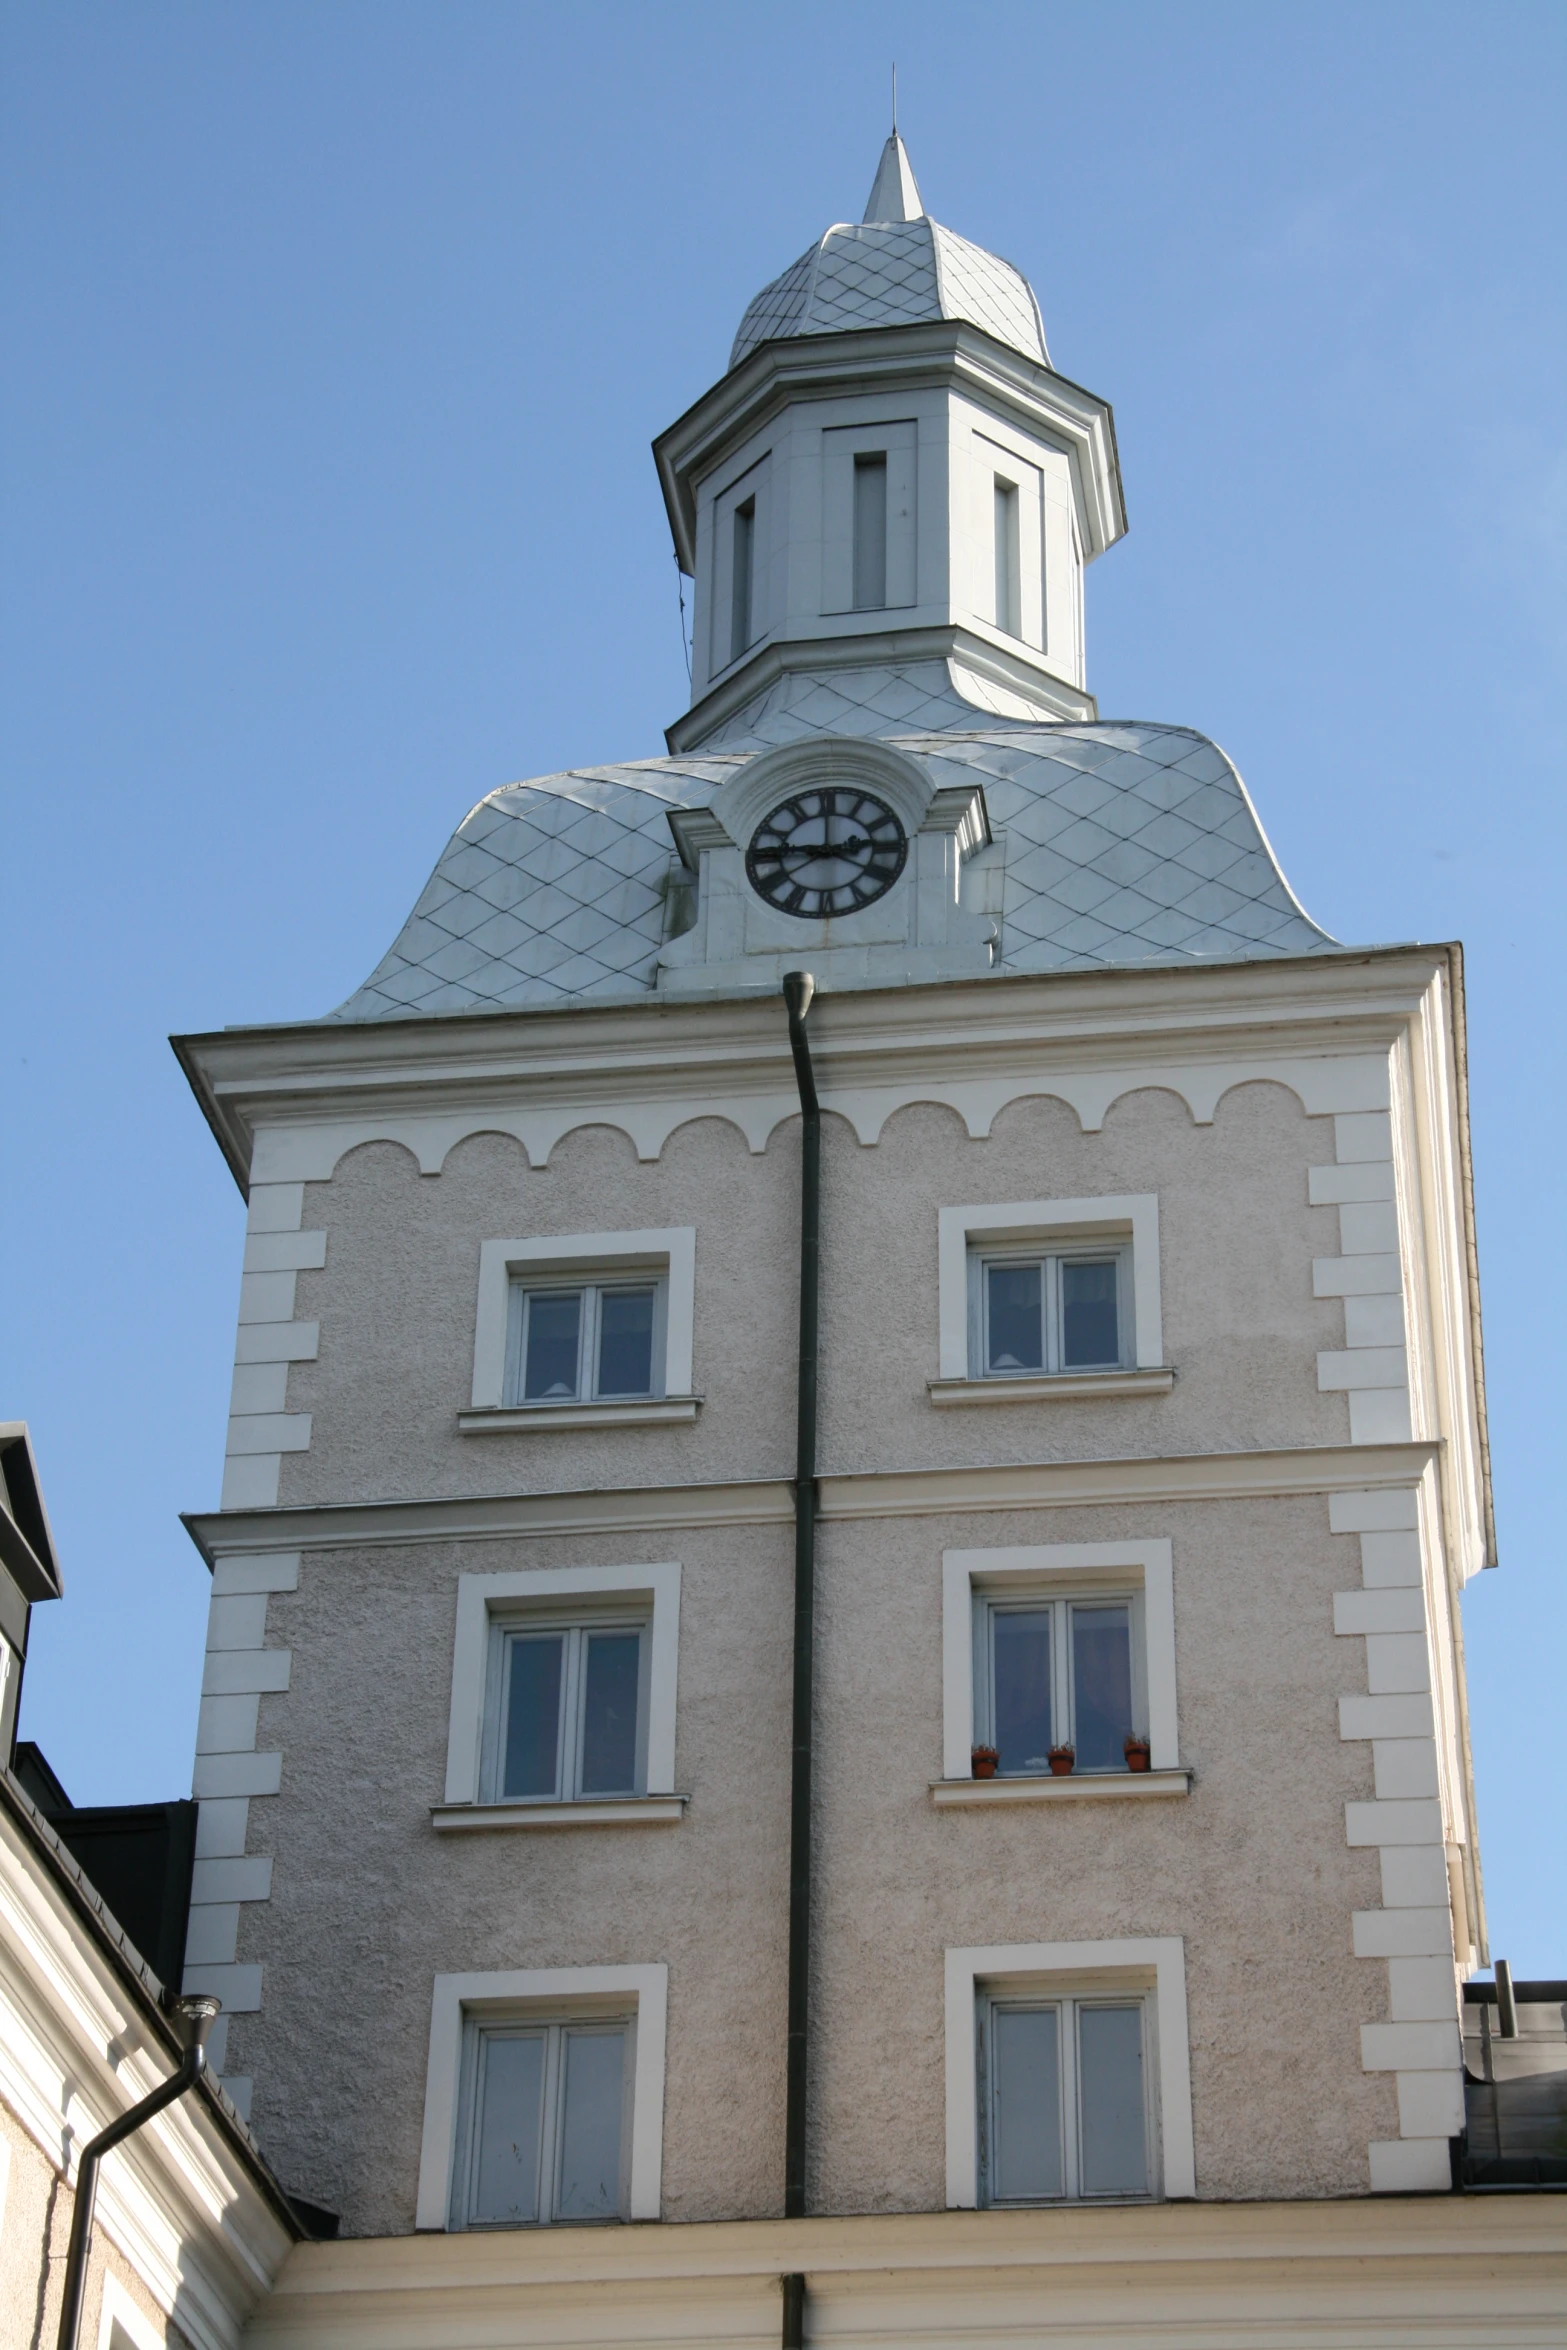 a tower with a clock sitting on the top of it